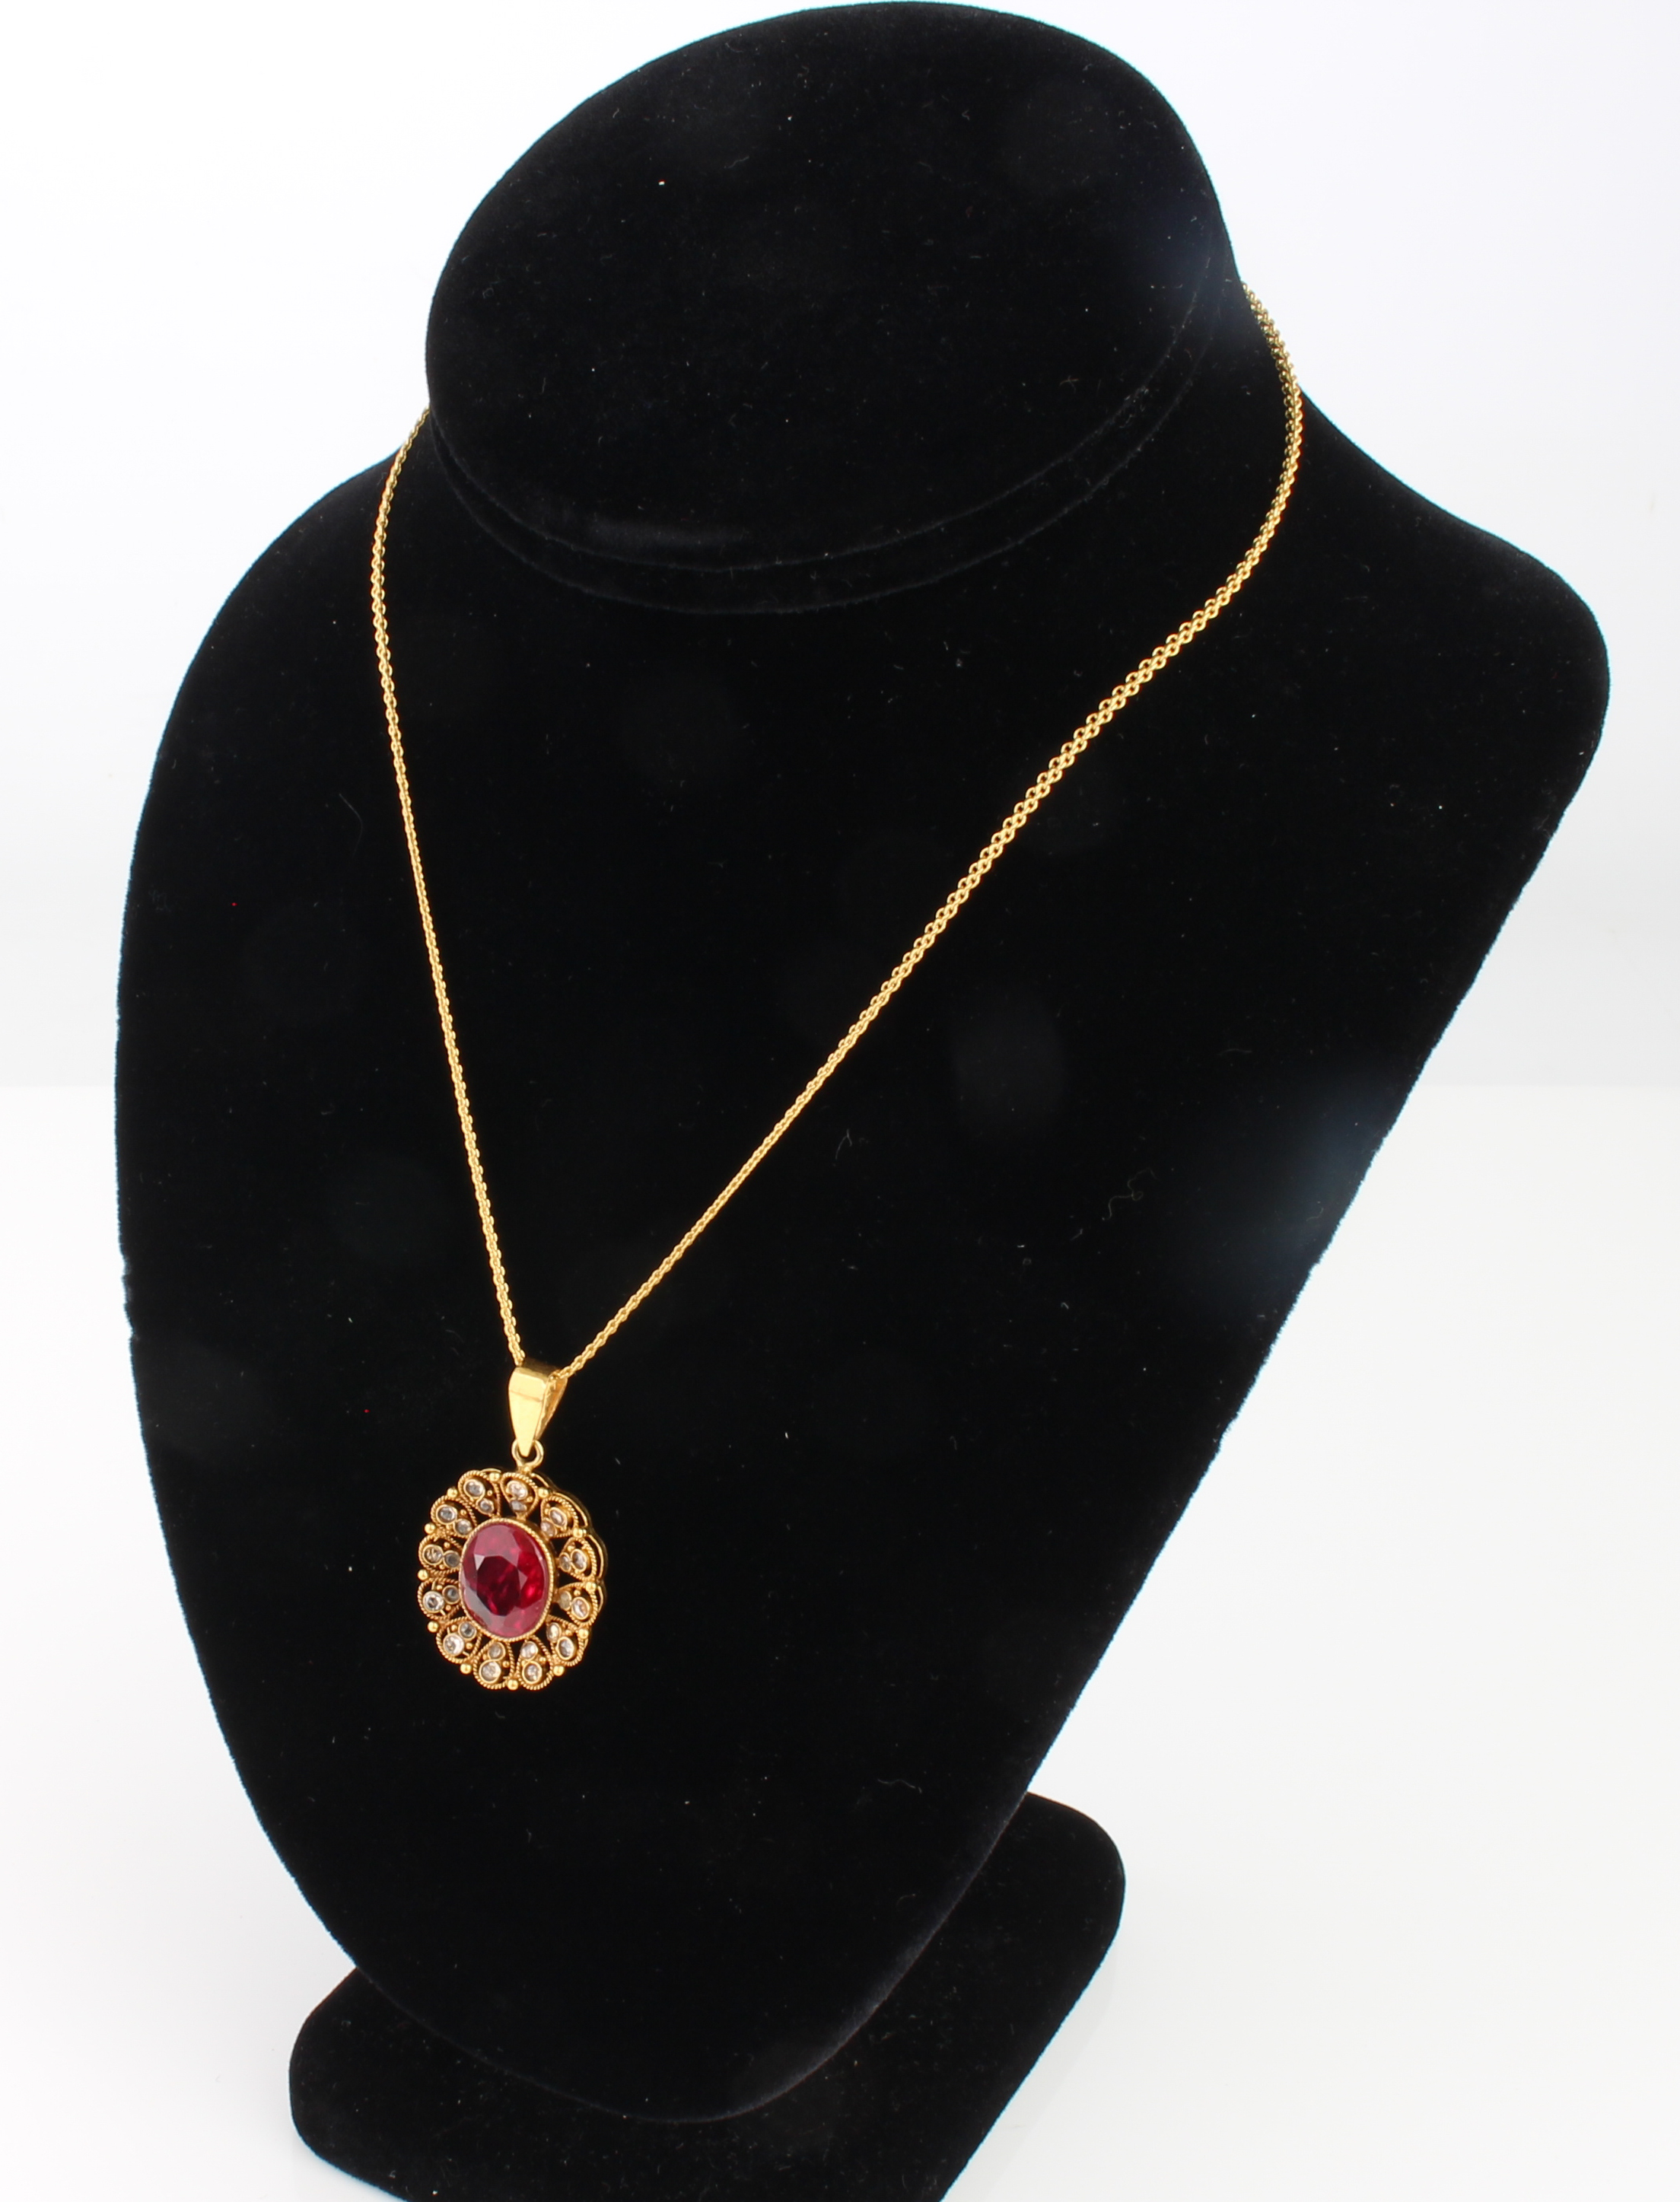 A 22ct gold, red stone and diamond cluster pendant necklace and earrings en suite - unmarked, - Image 4 of 5